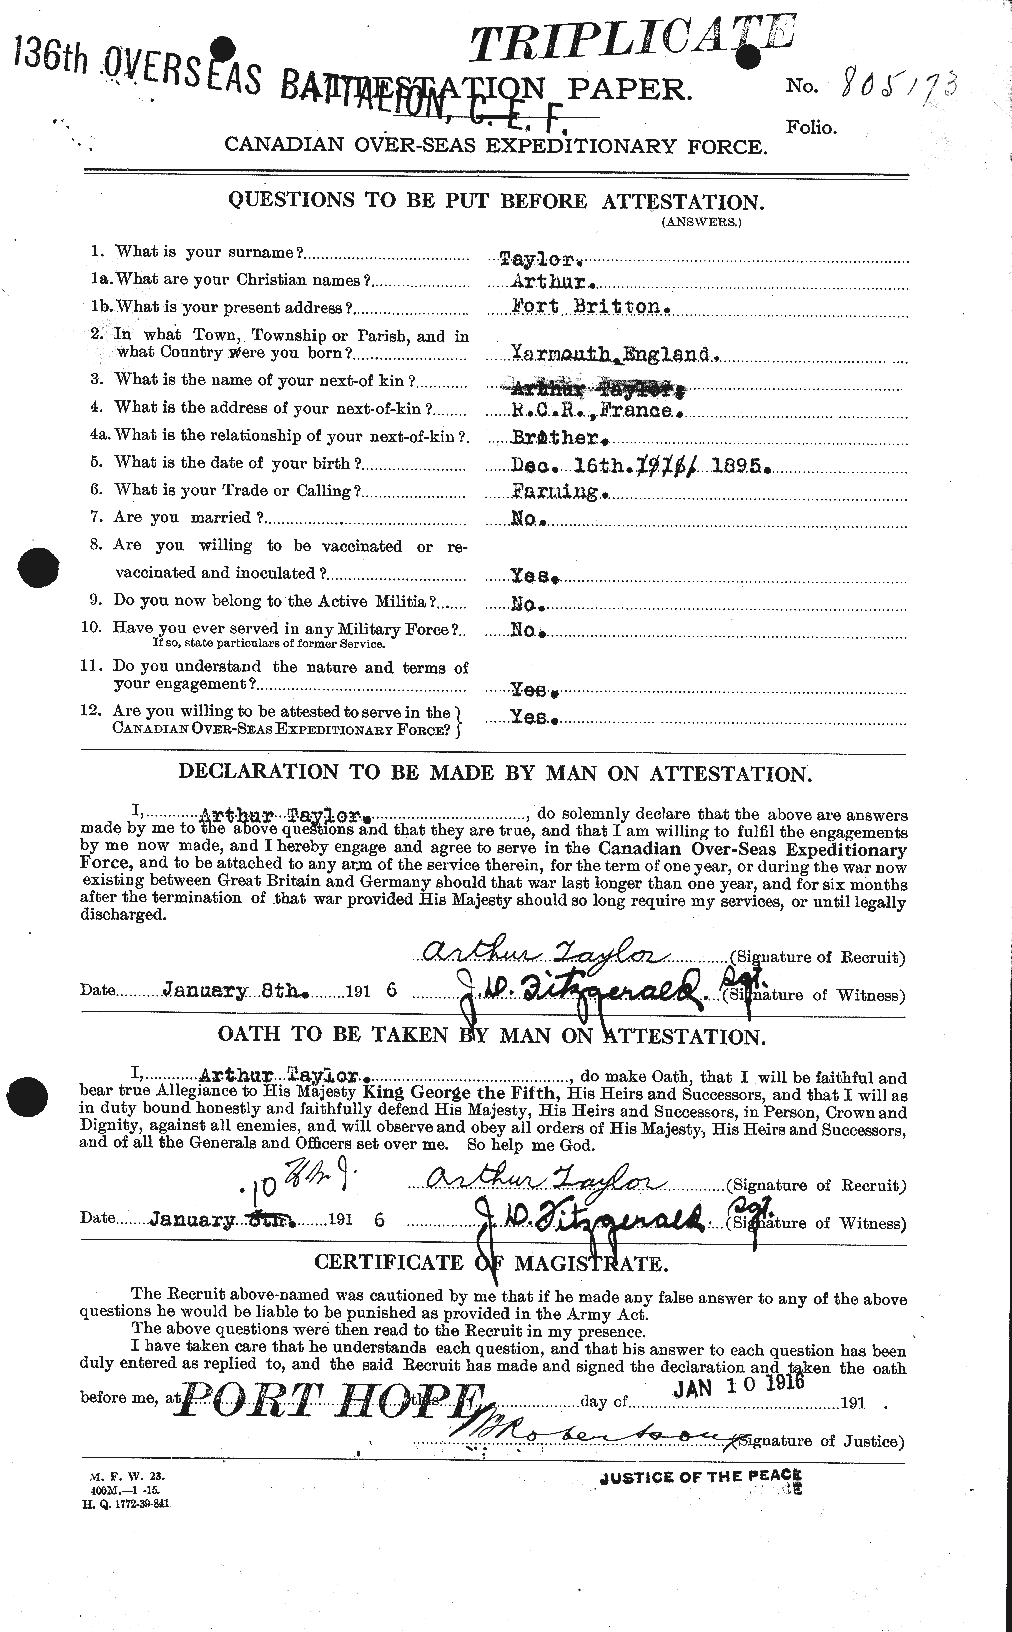 Personnel Records of the First World War - CEF 626708a